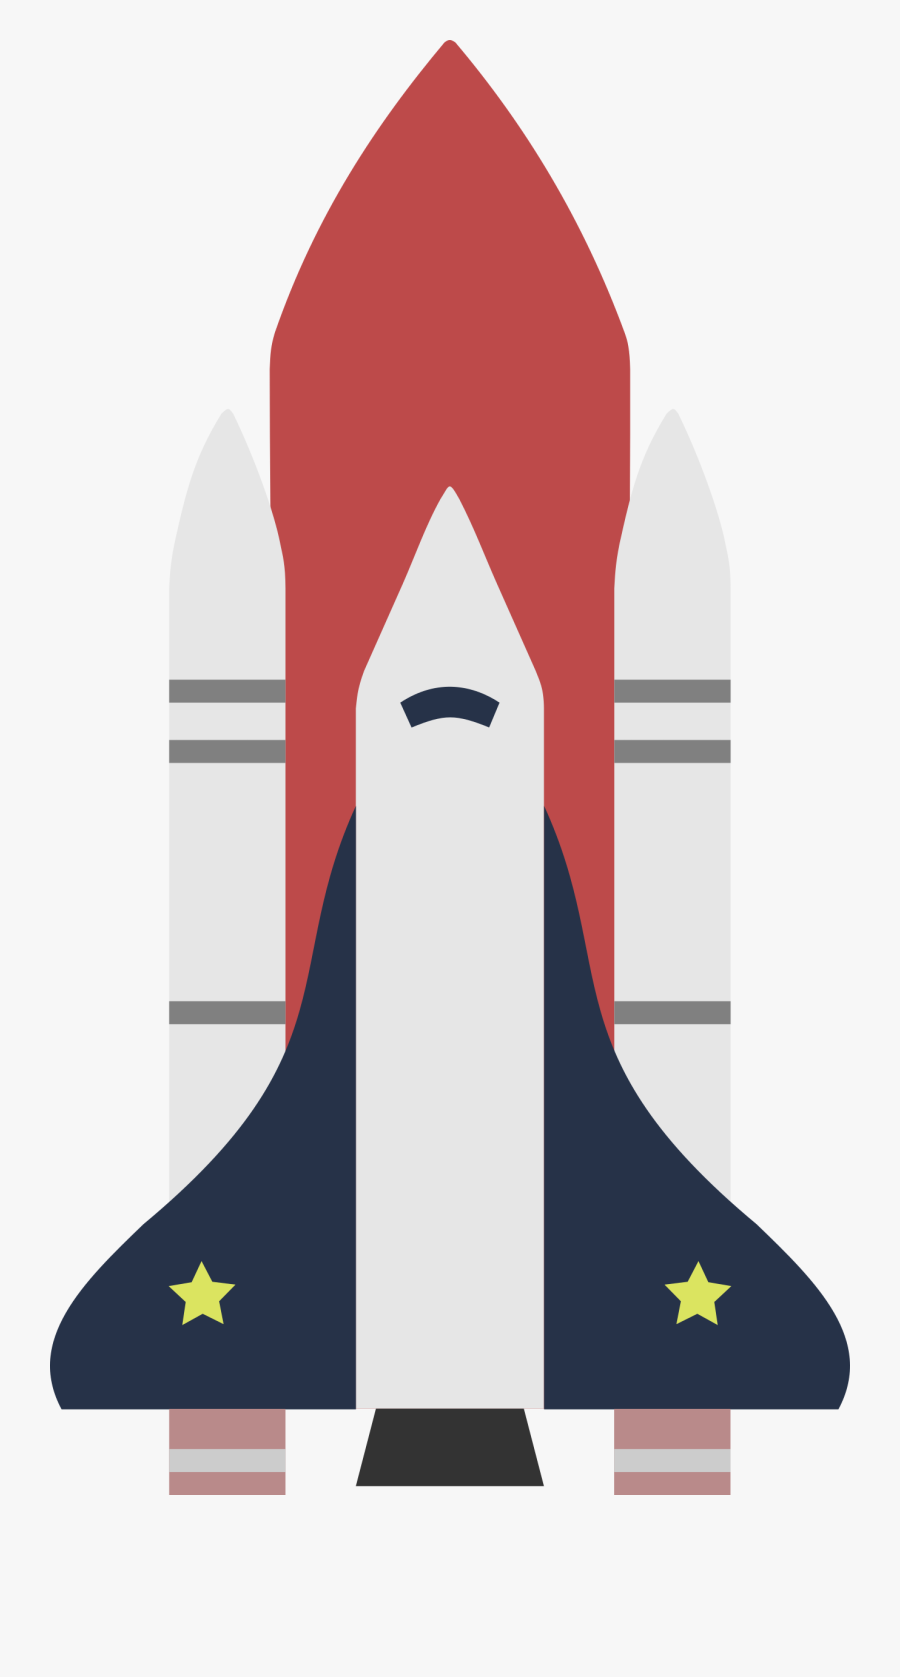 Best Hd Space Shuttle Vector Image - Space Shuttle Vector Free, Transparent Clipart